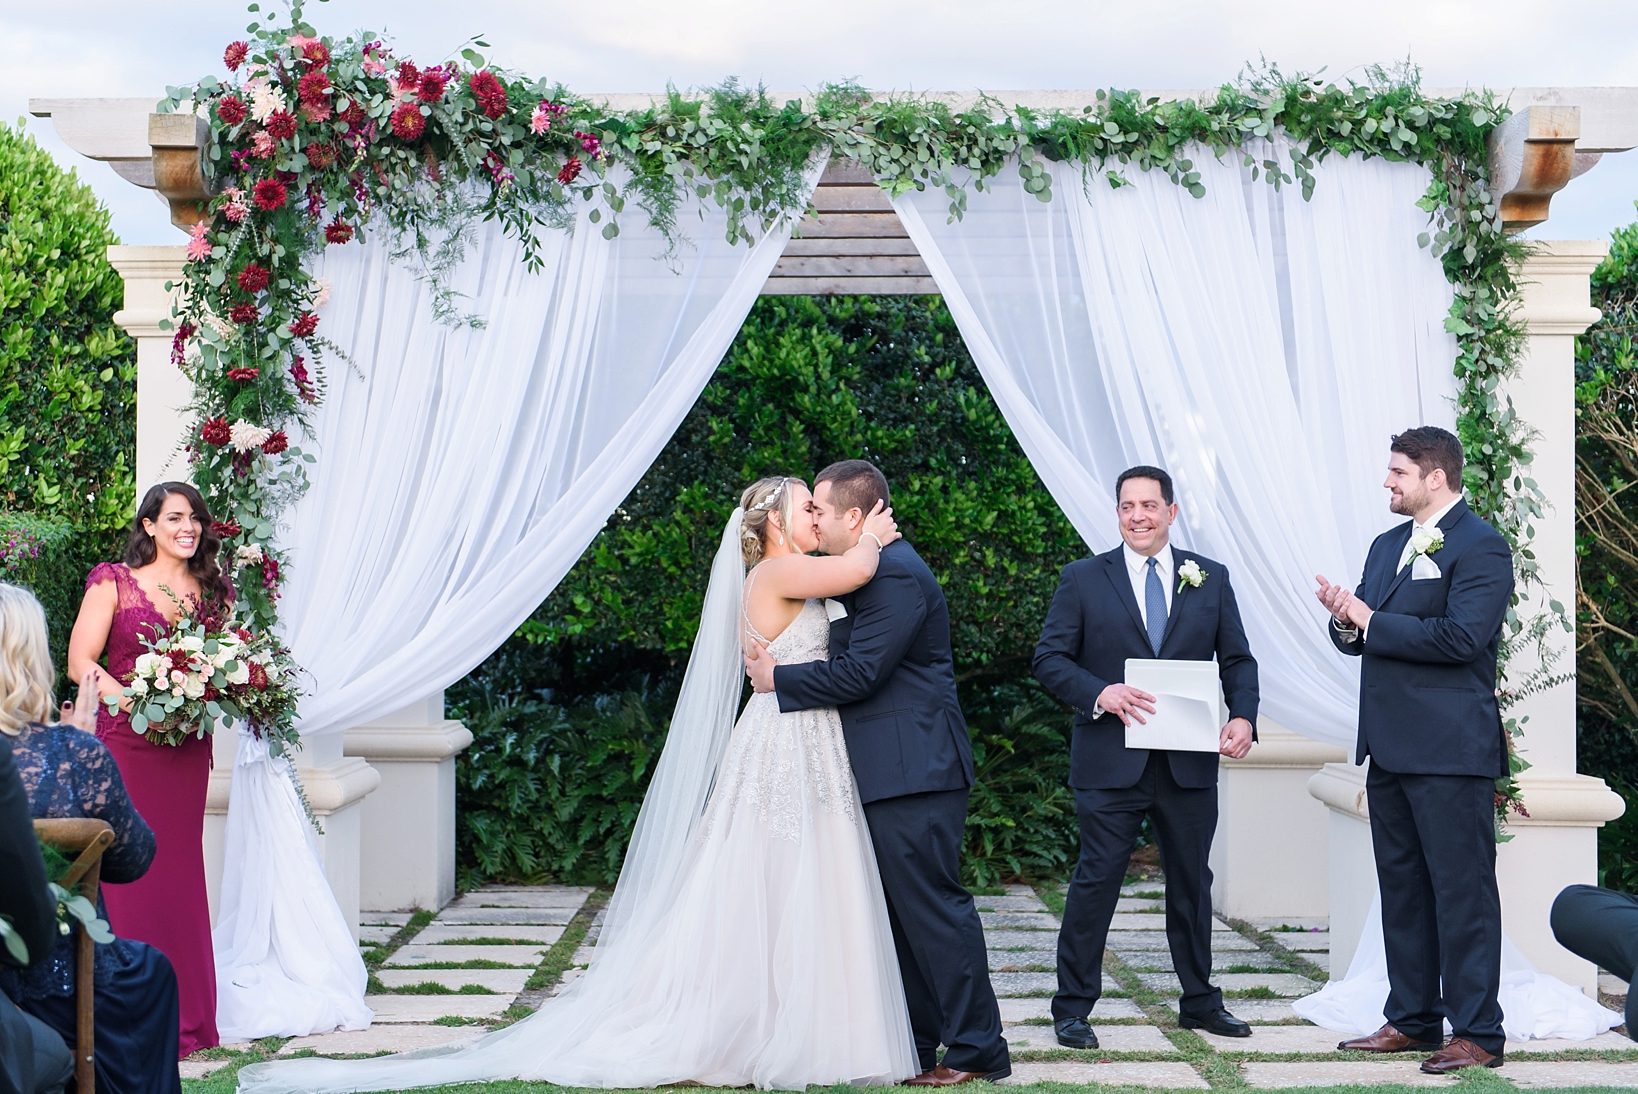 The first kiss as Mr. & Mrs. under a floral arch